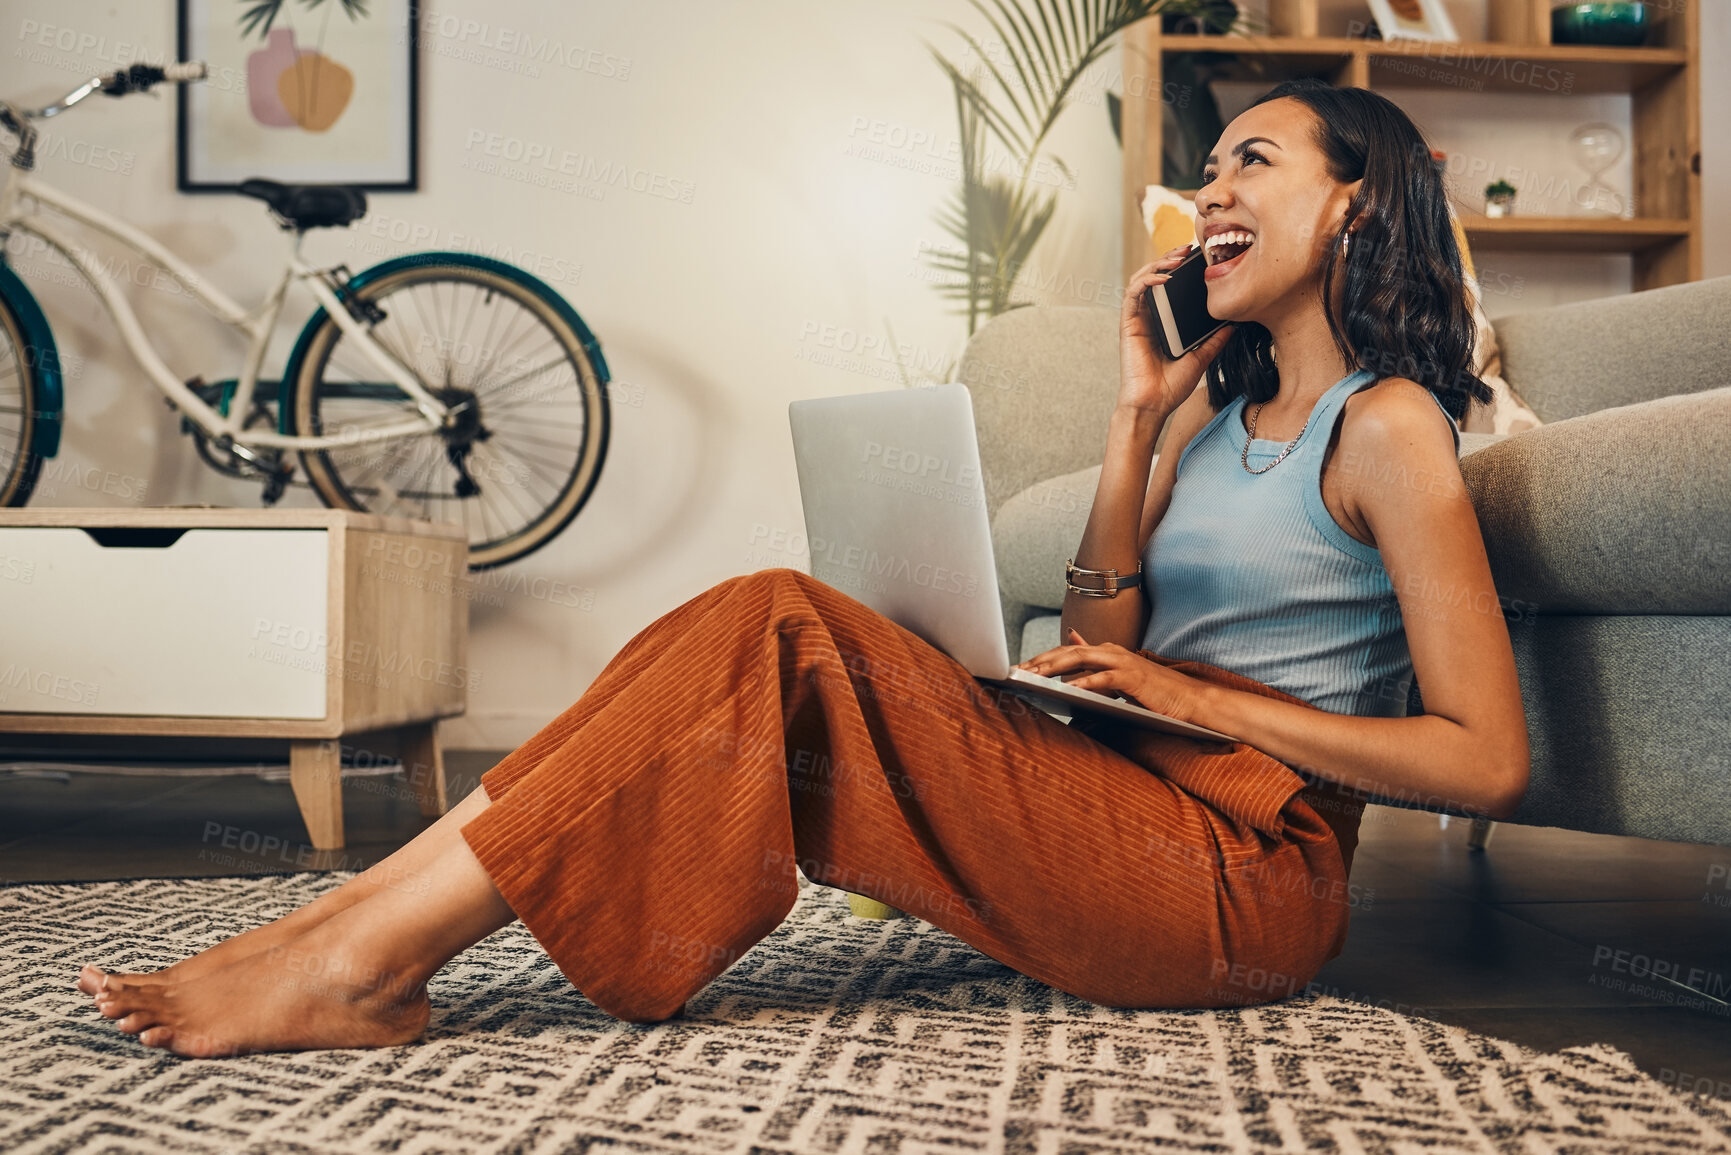 Buy stock photo Beautiful mixed race woman using blogging laptop and cellphone to talk to clients in home living room. Hispanic entrepreneur sitting cross legged alone on lounge floor and networking on technology